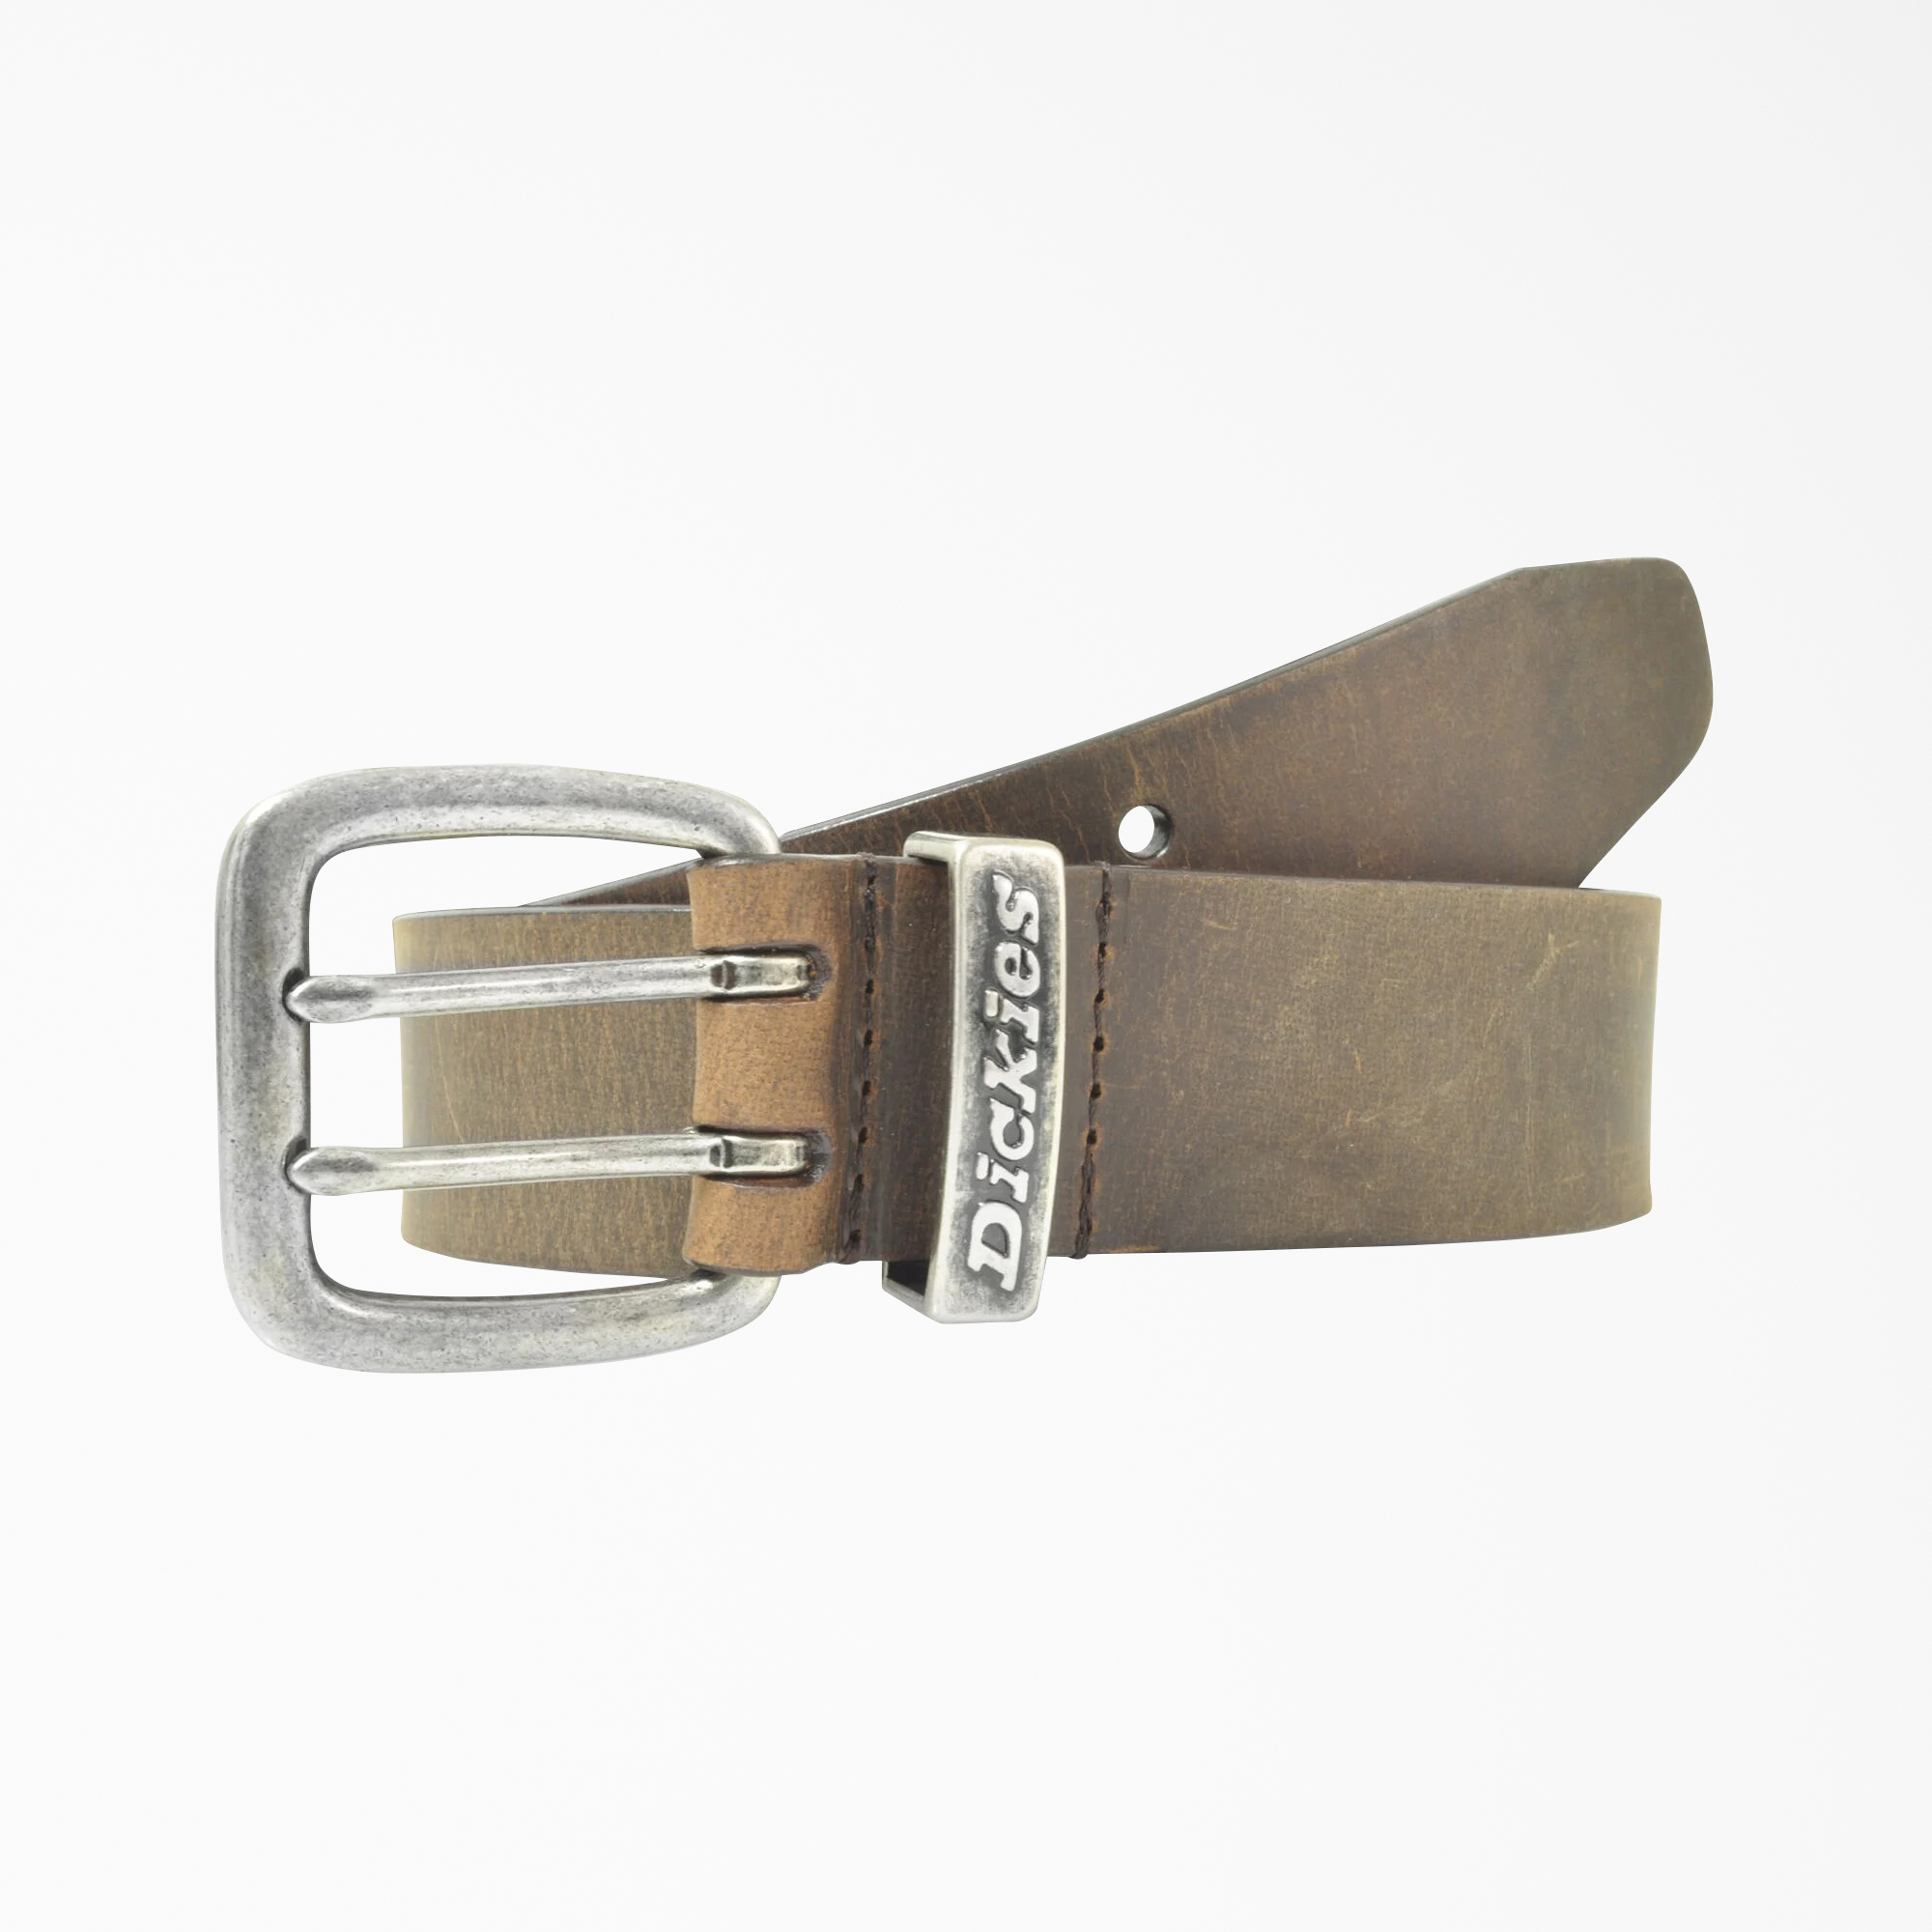 Double Prong Buckle Leather Belt - Tan (BR)